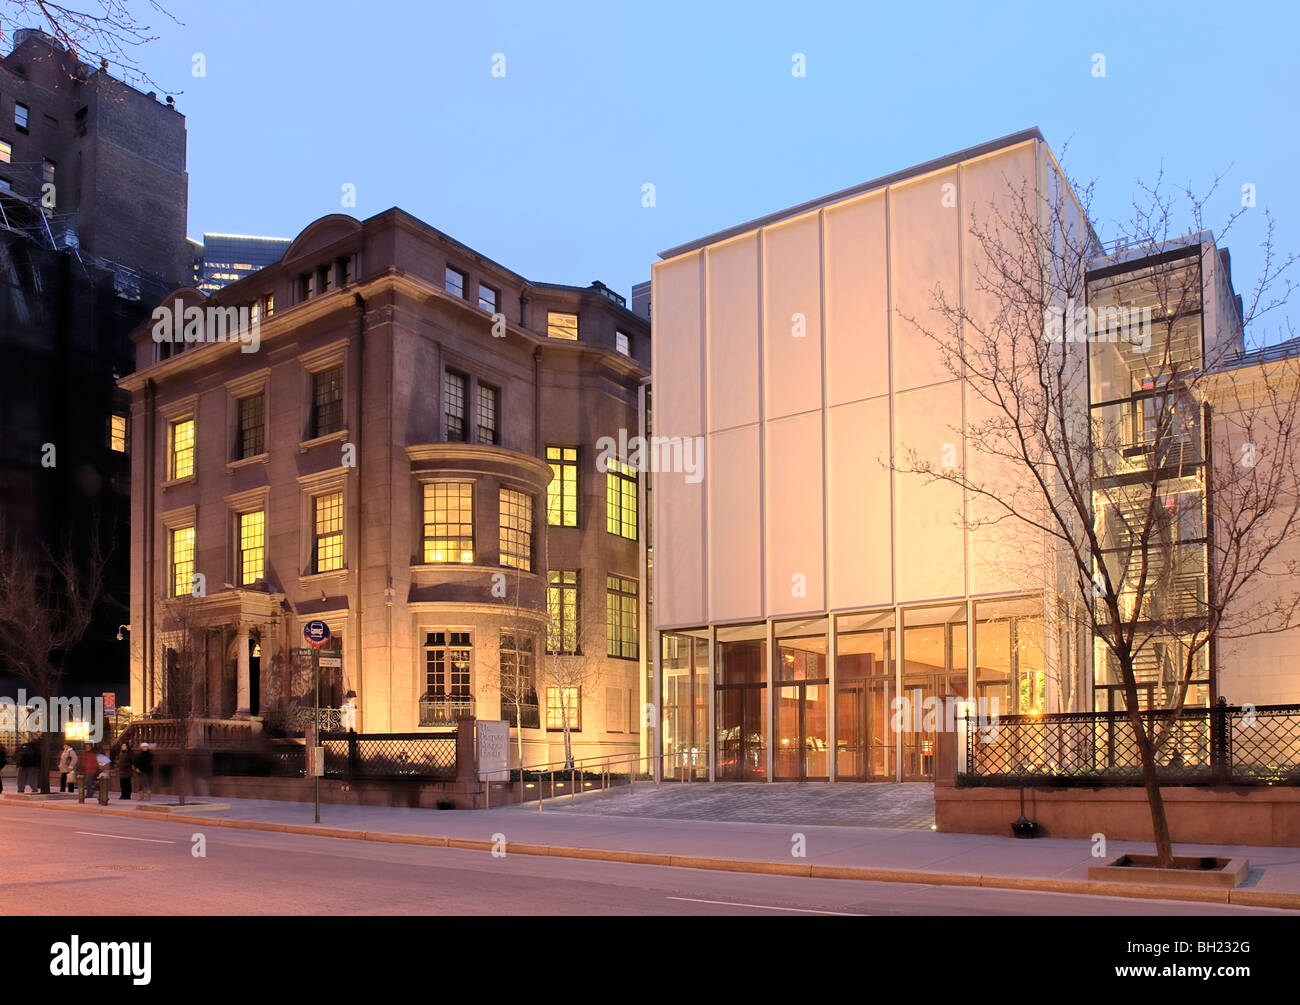 The Morgan Library & Museum, Renzo Piano Architecture, Madison Avenue, New York City, New York. Banque D'Images